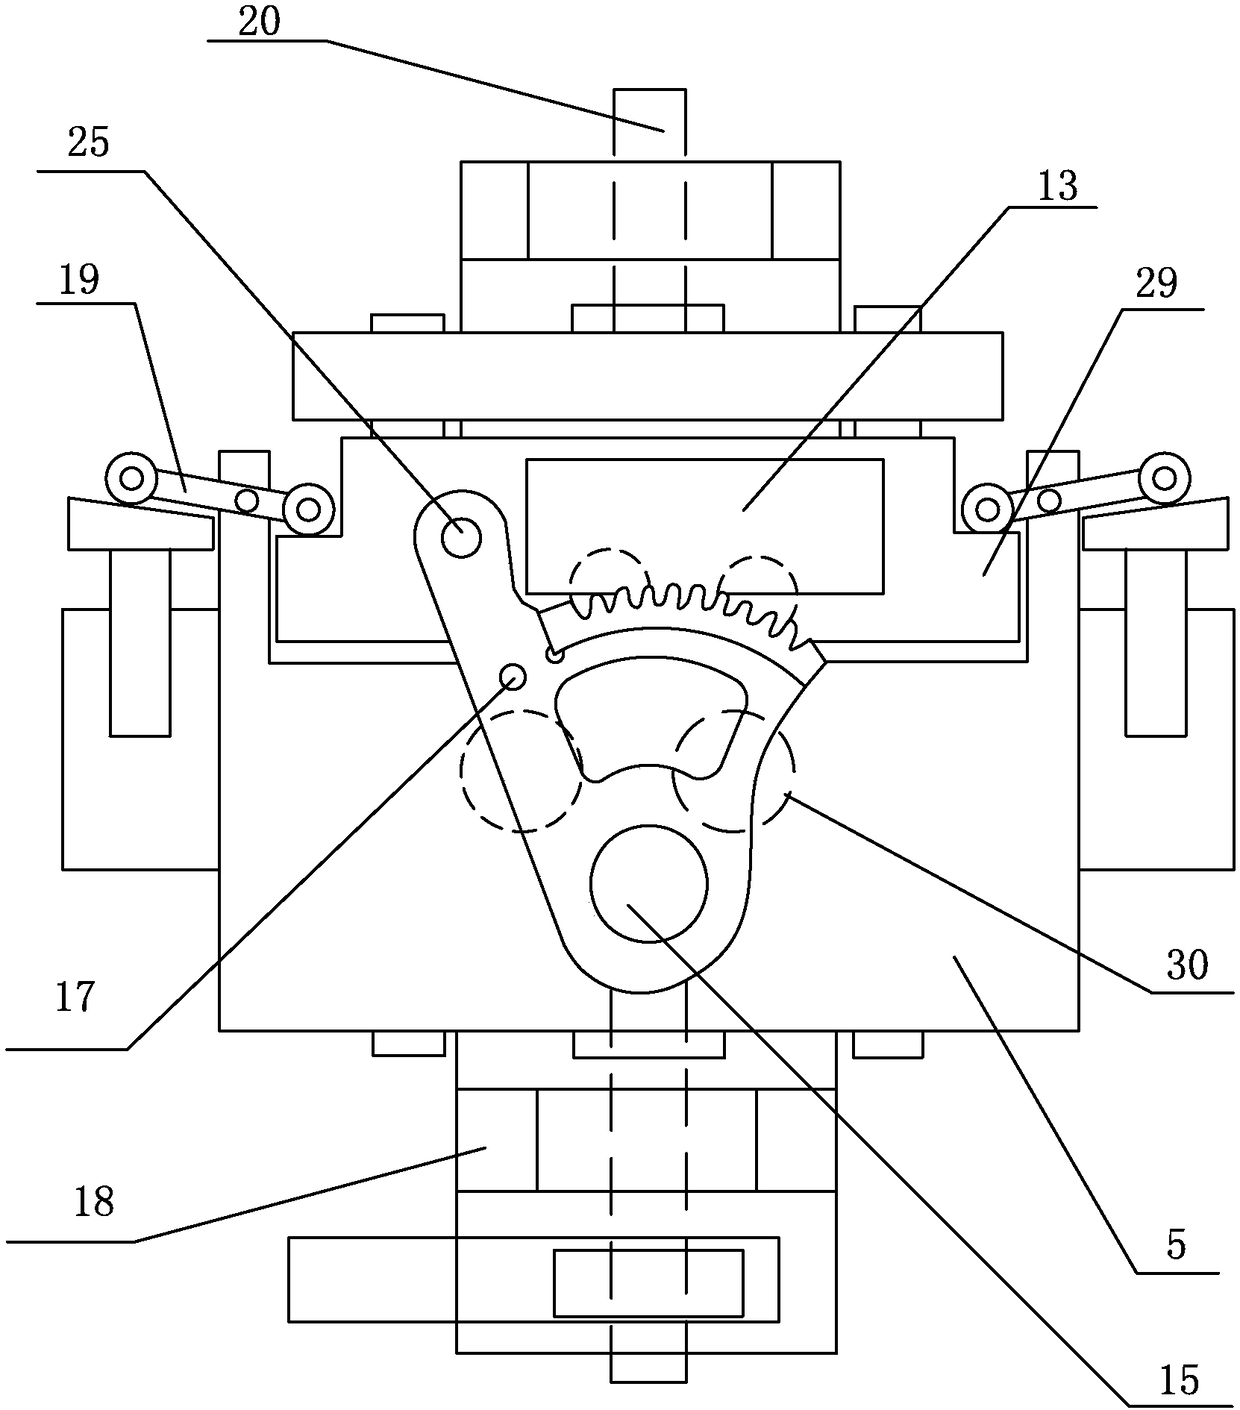 An automated system for producing toothed plate structures in car seats